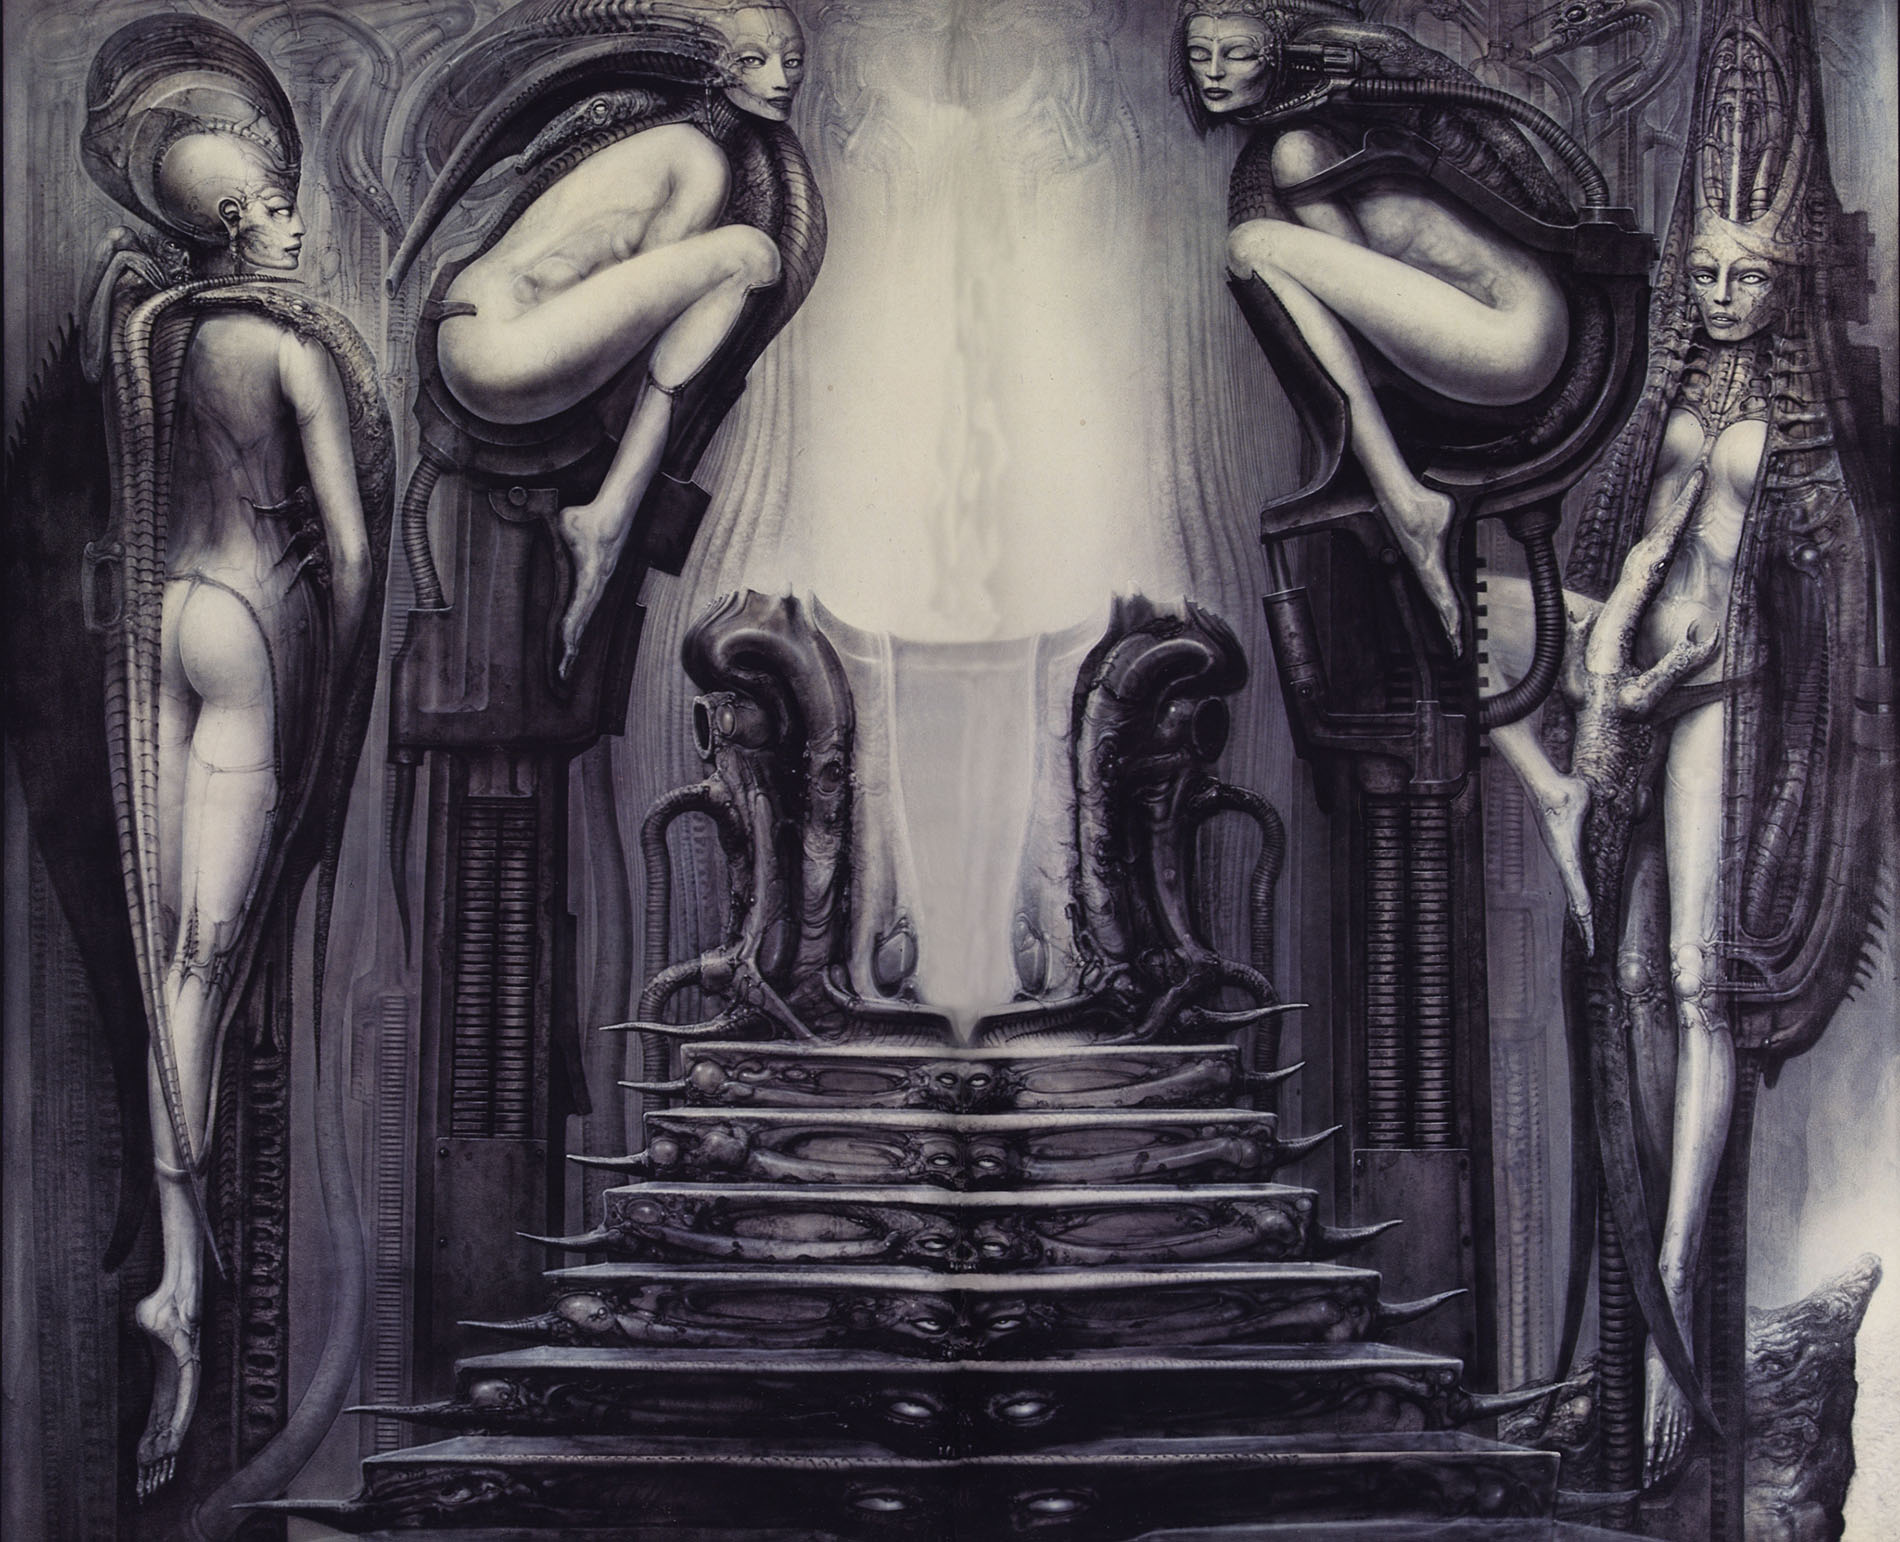 H. R. Giger - Passage Temple: The Way of the Magician (1975)